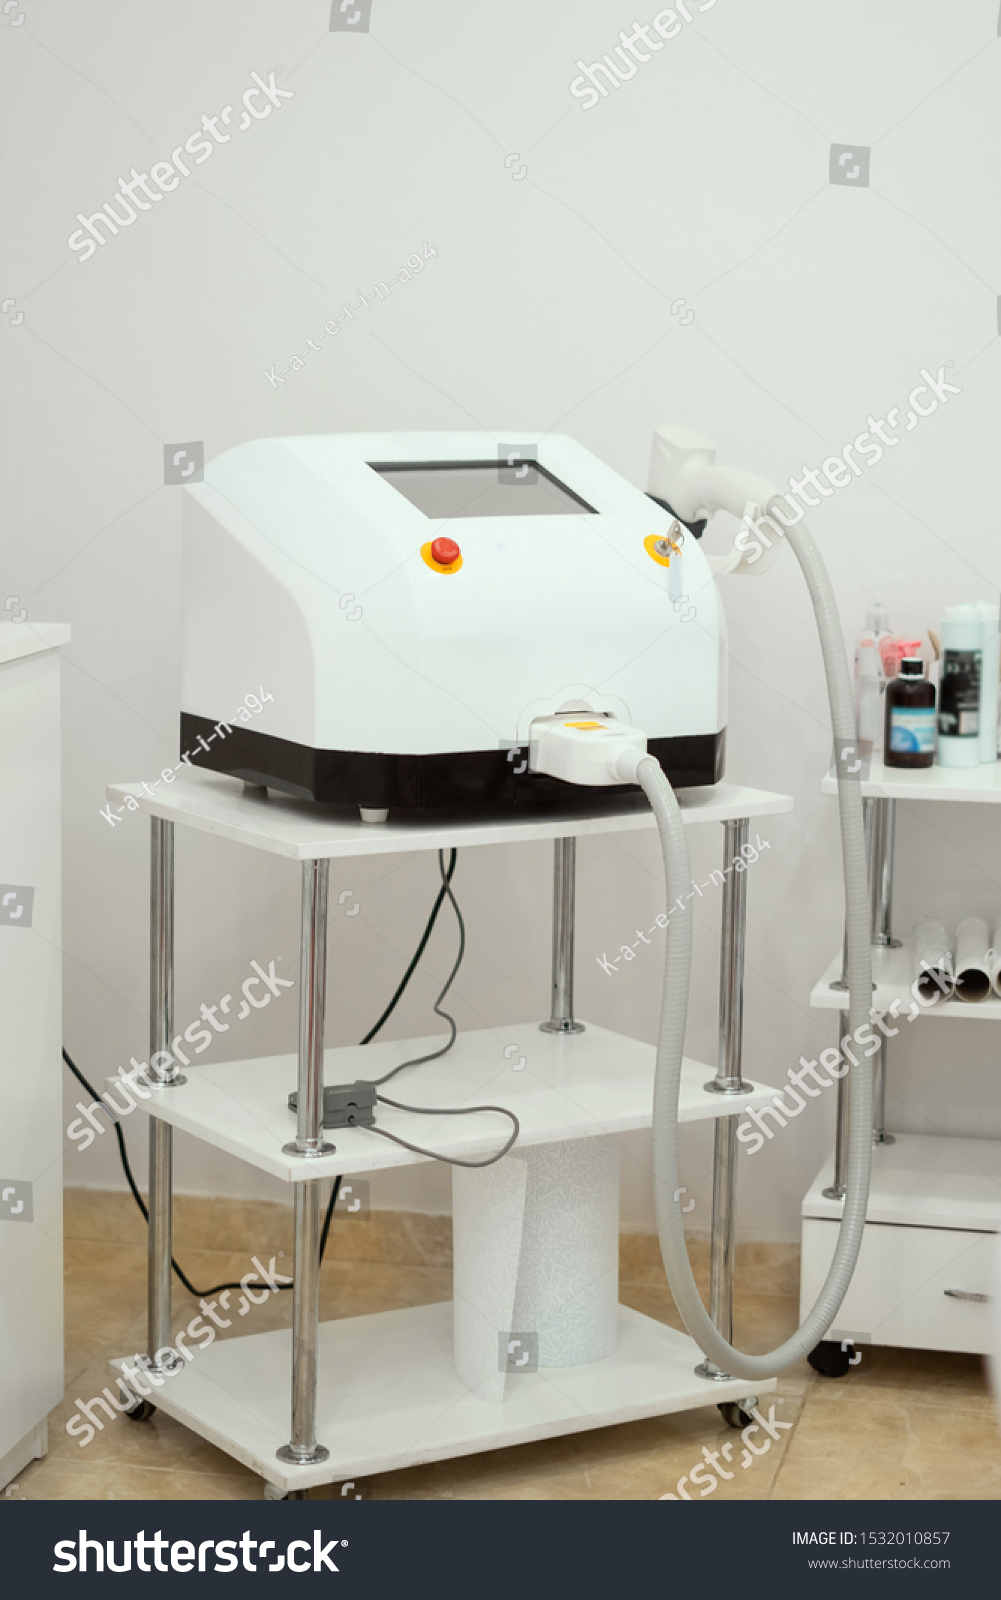 white cosmetology cabinet, close-up laser device, laser device, hair removal
 #1532010857